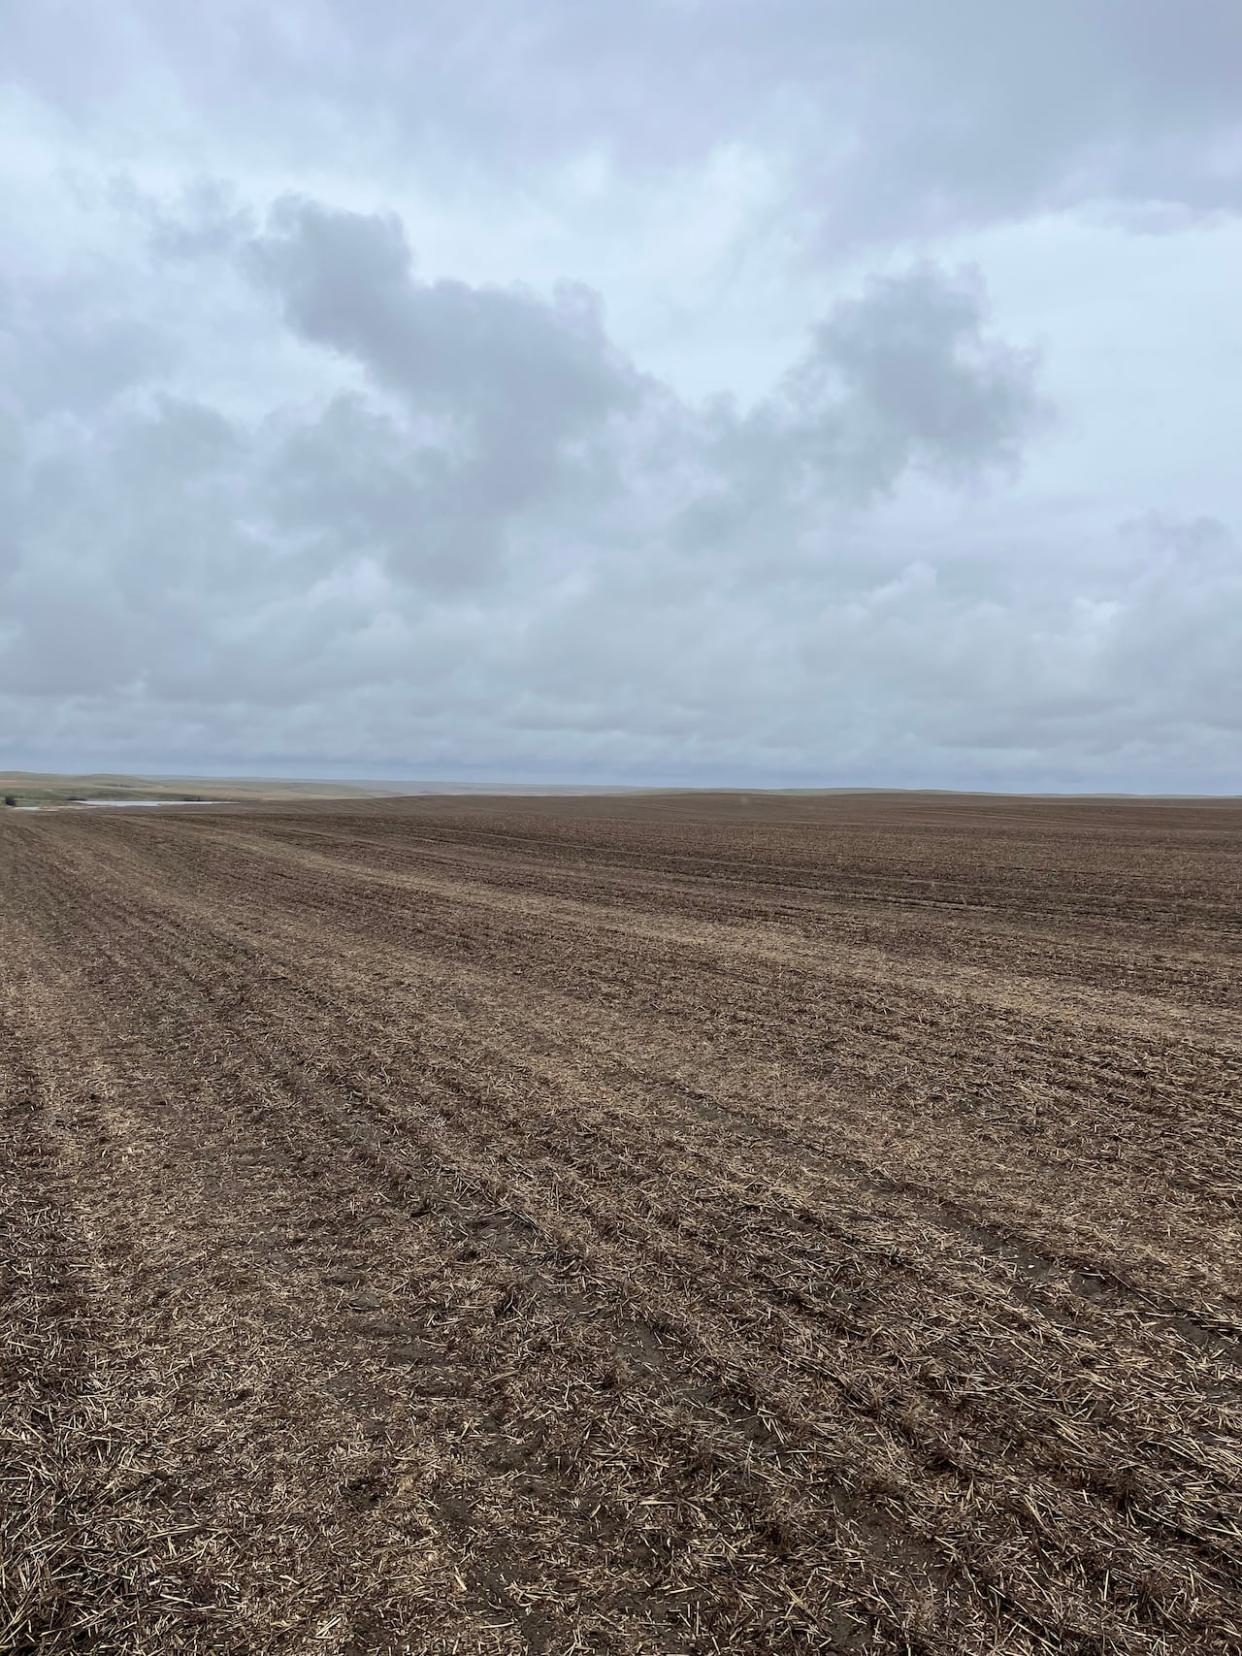 Farmers in southern Saskatchewan are benefitting from a downpour at the beginning of the farming season after years of drought. (Derek Axten - image credit)